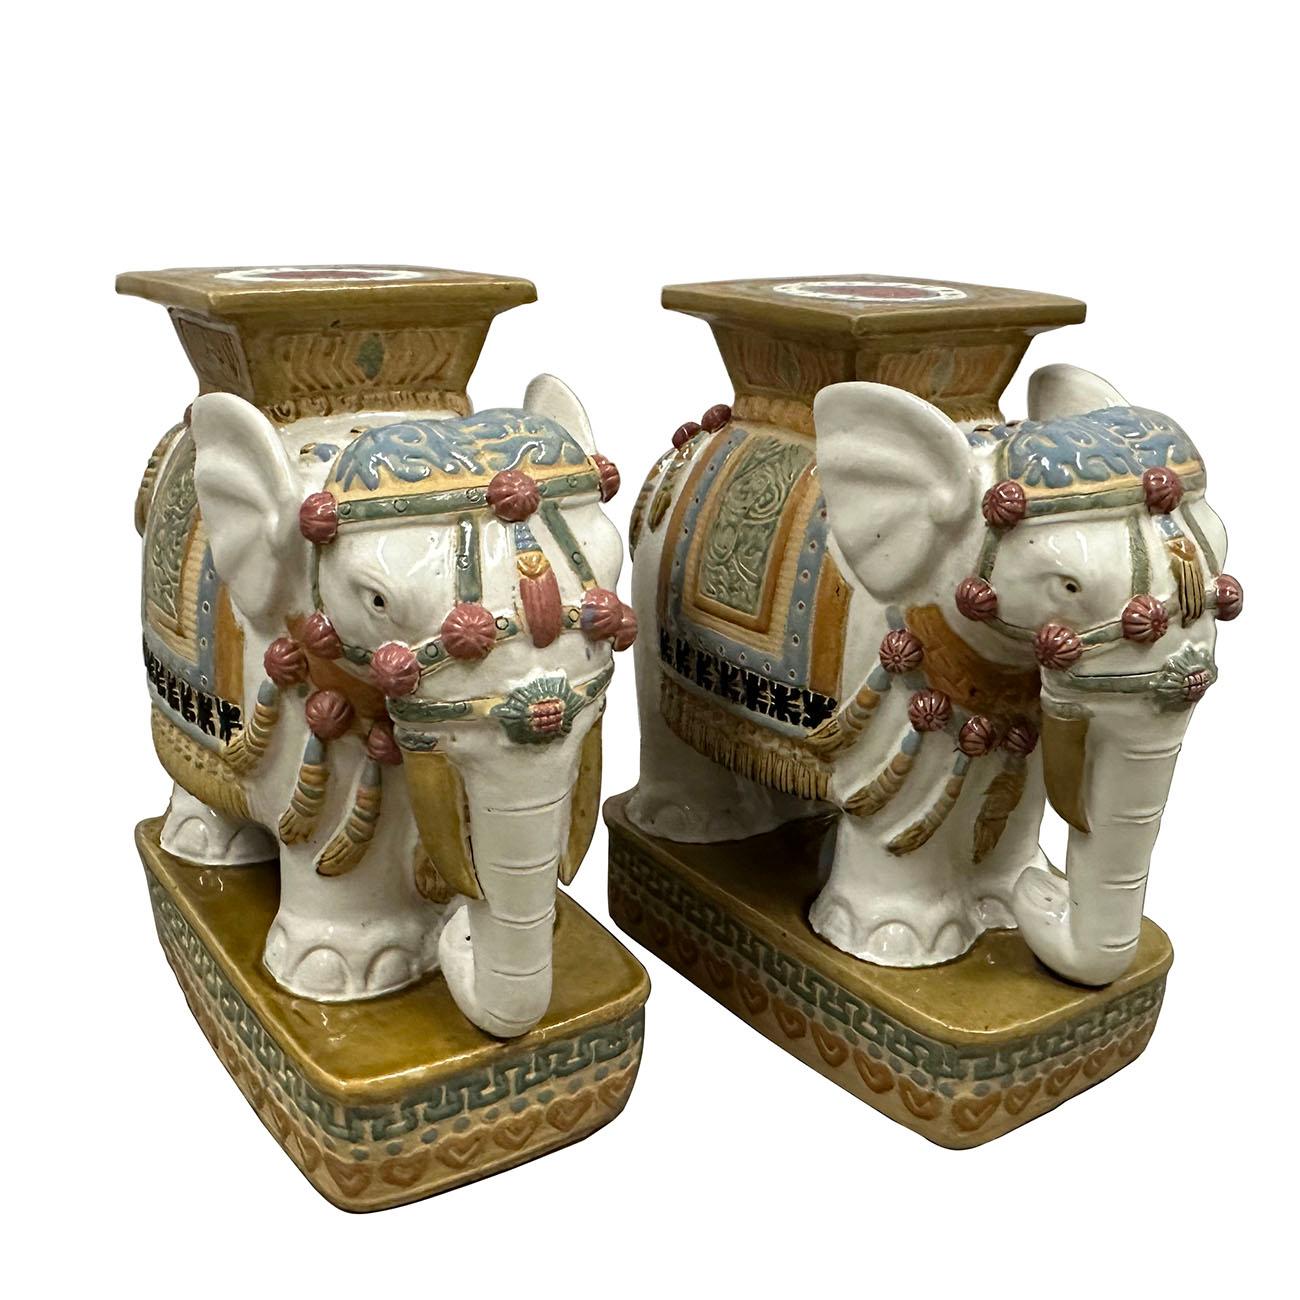 This pair of magnificent Chinese colored glazed ceramic elephant garden seat are hand made and hand carved in about 1950's. In ancient China, elephant represent lucky and peaceful life which were Chinese people hoping for. Look at the pictures, this